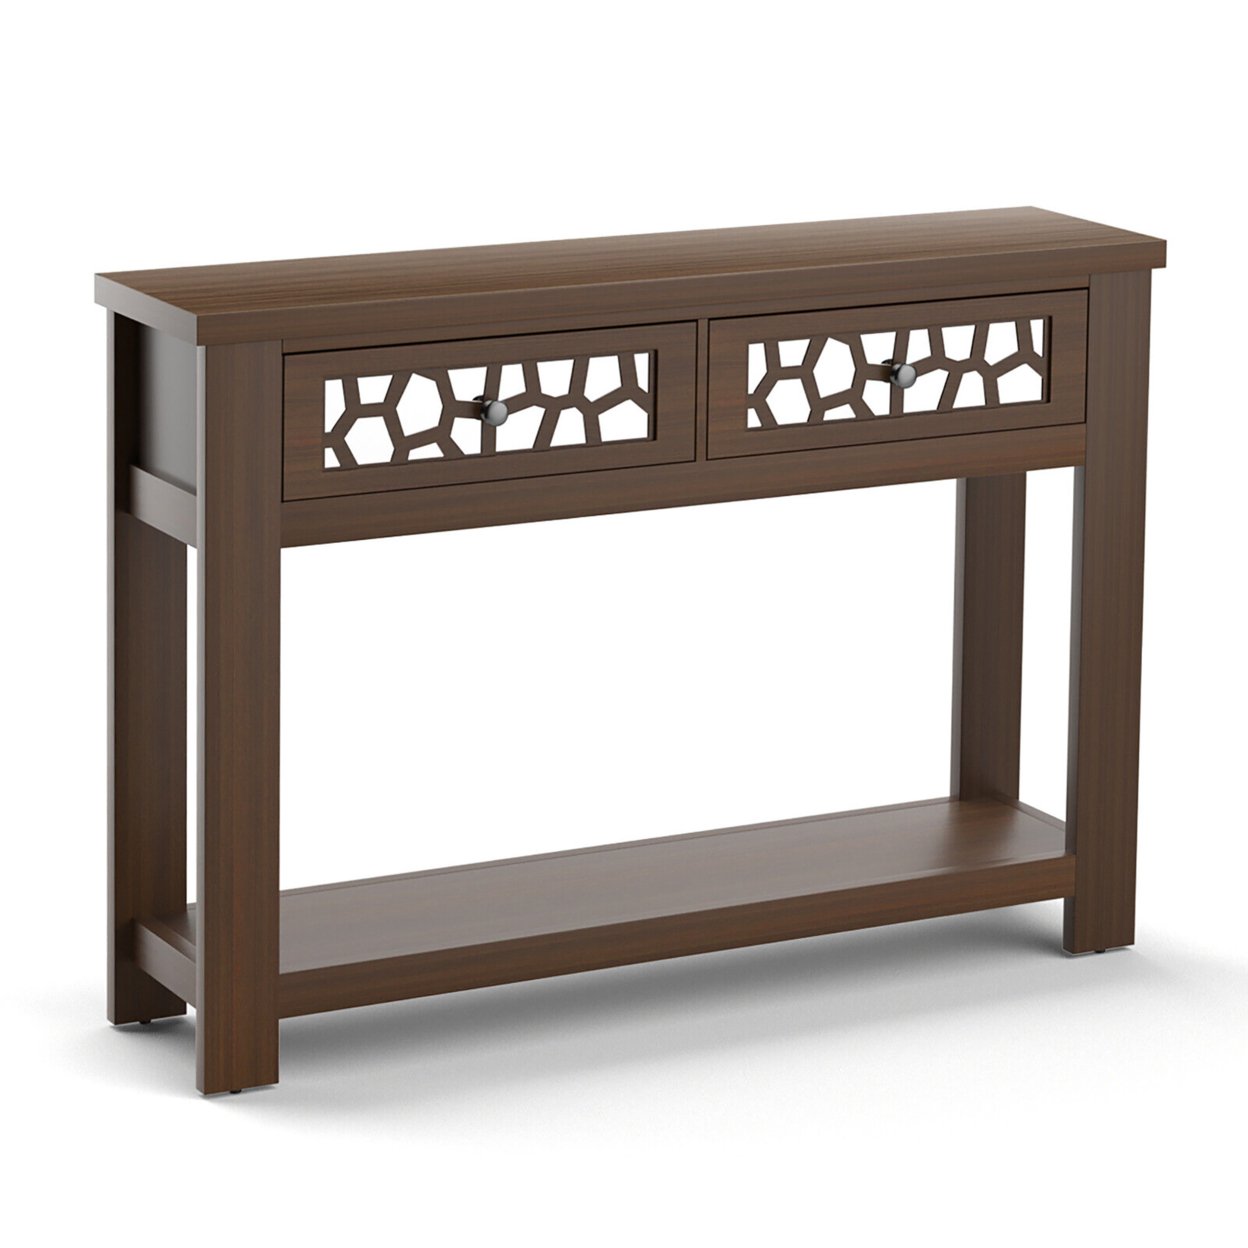 2-tier Console Entryway Table W/ Drawers For Living Room Entrance Rustic - Rustic Brown